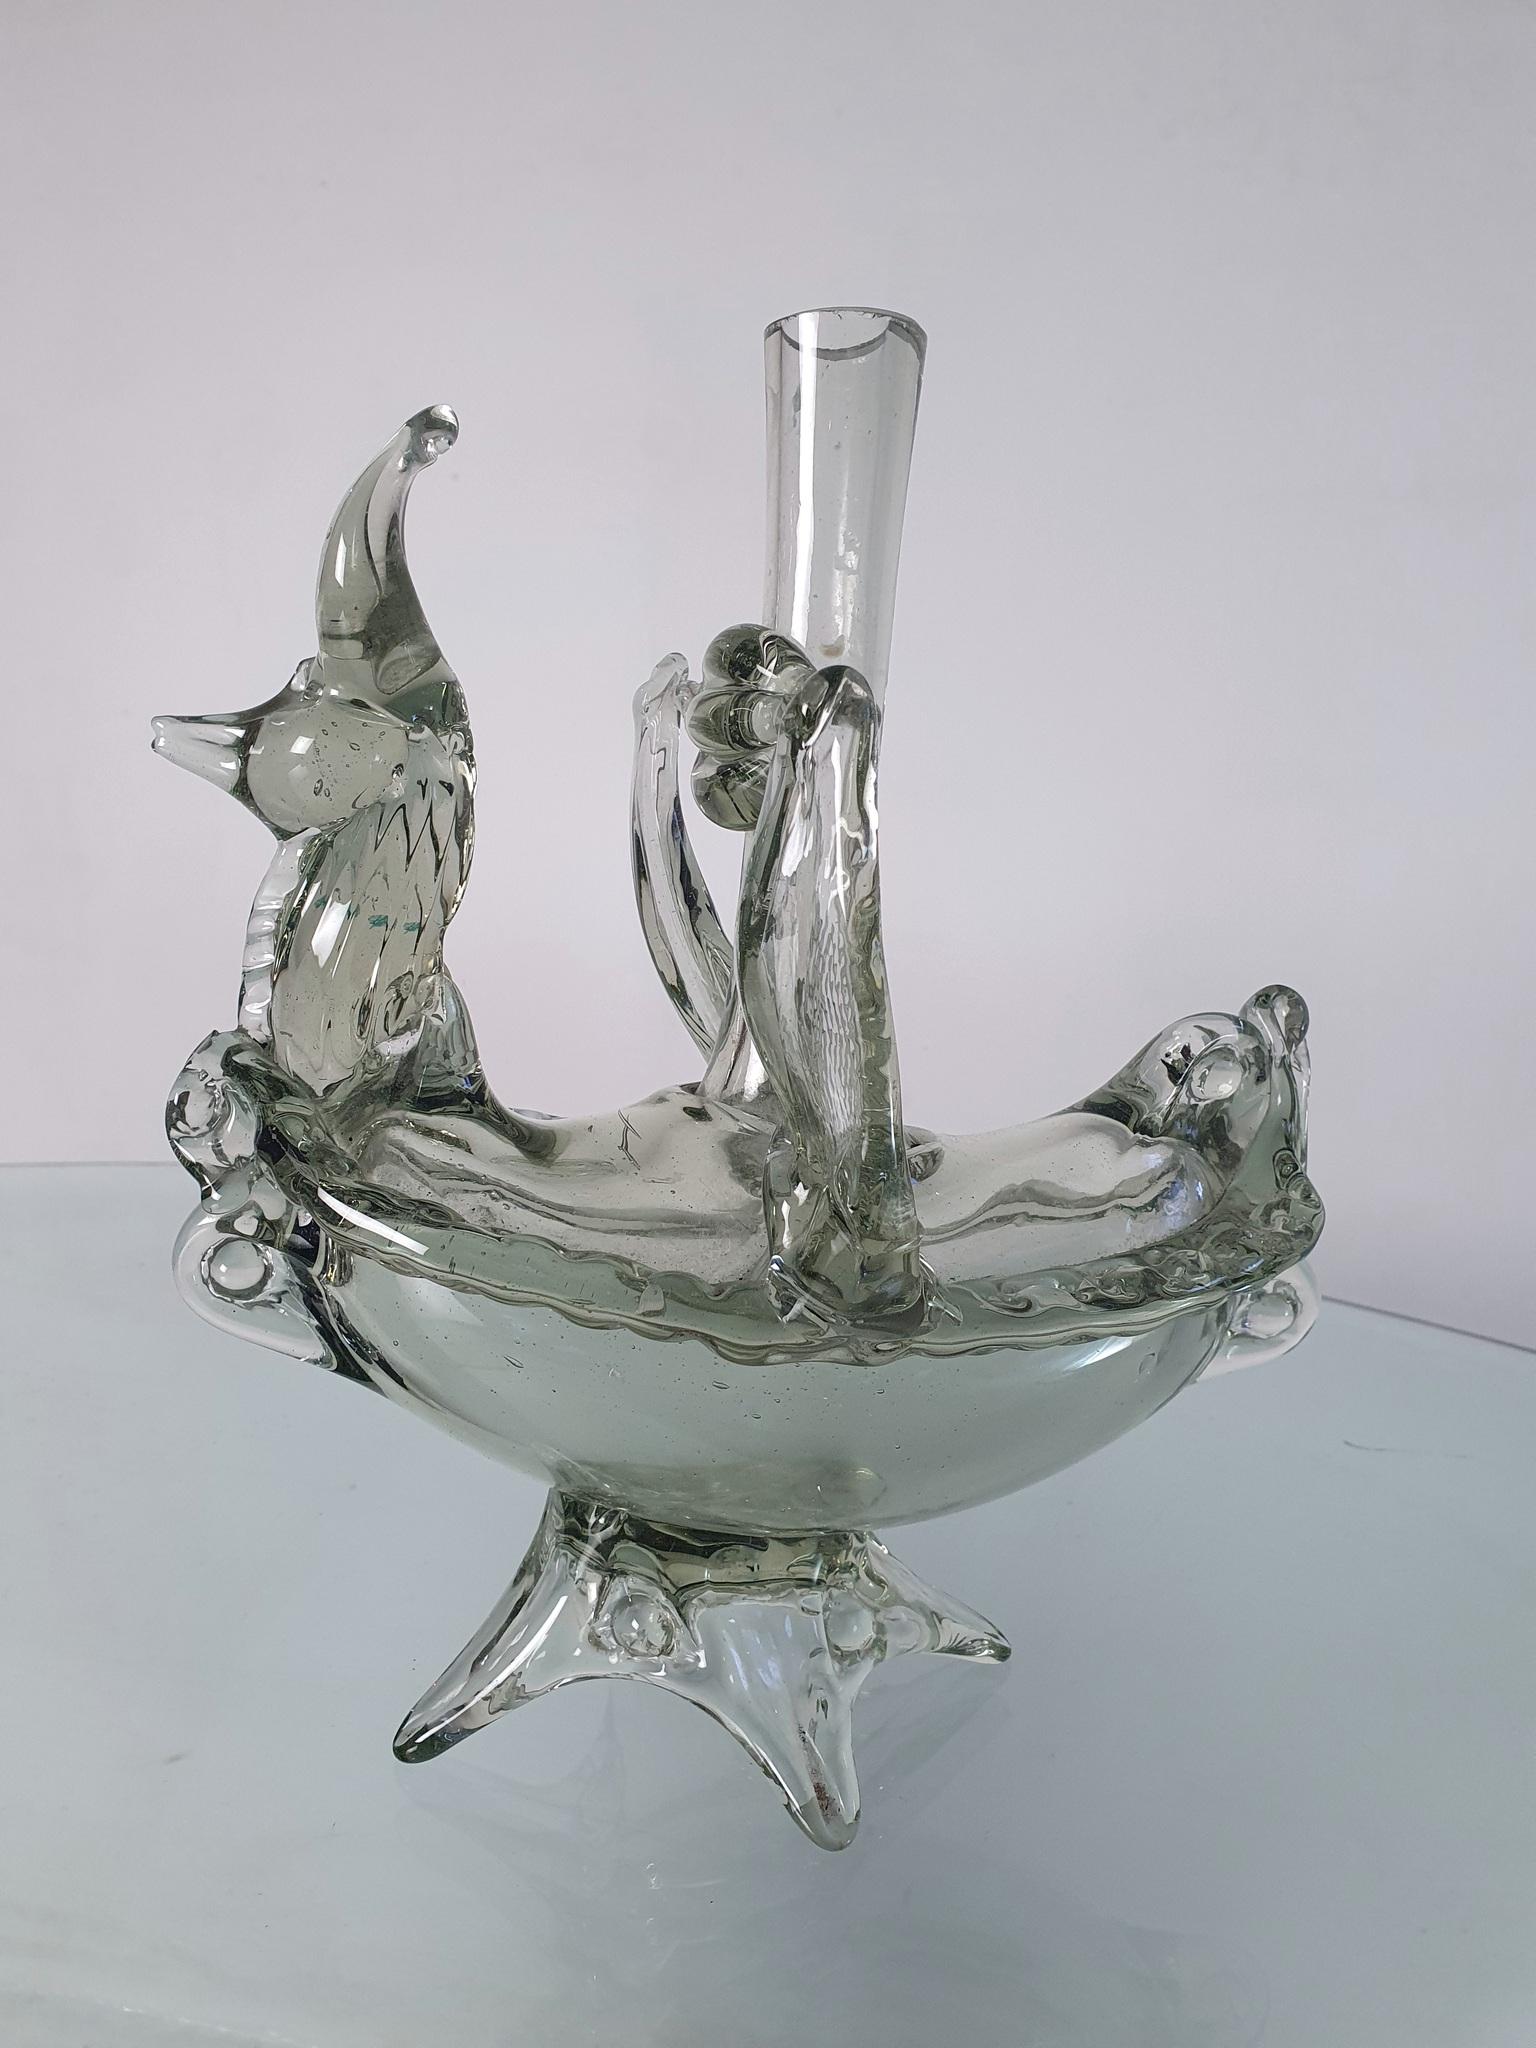 A unique Murano glass vessel that can be used as a vase, bottle or a candle holder in the shape of some kind of mystical fox in the front and a boat shape at the same time. Produced in Murano during the 1940s.